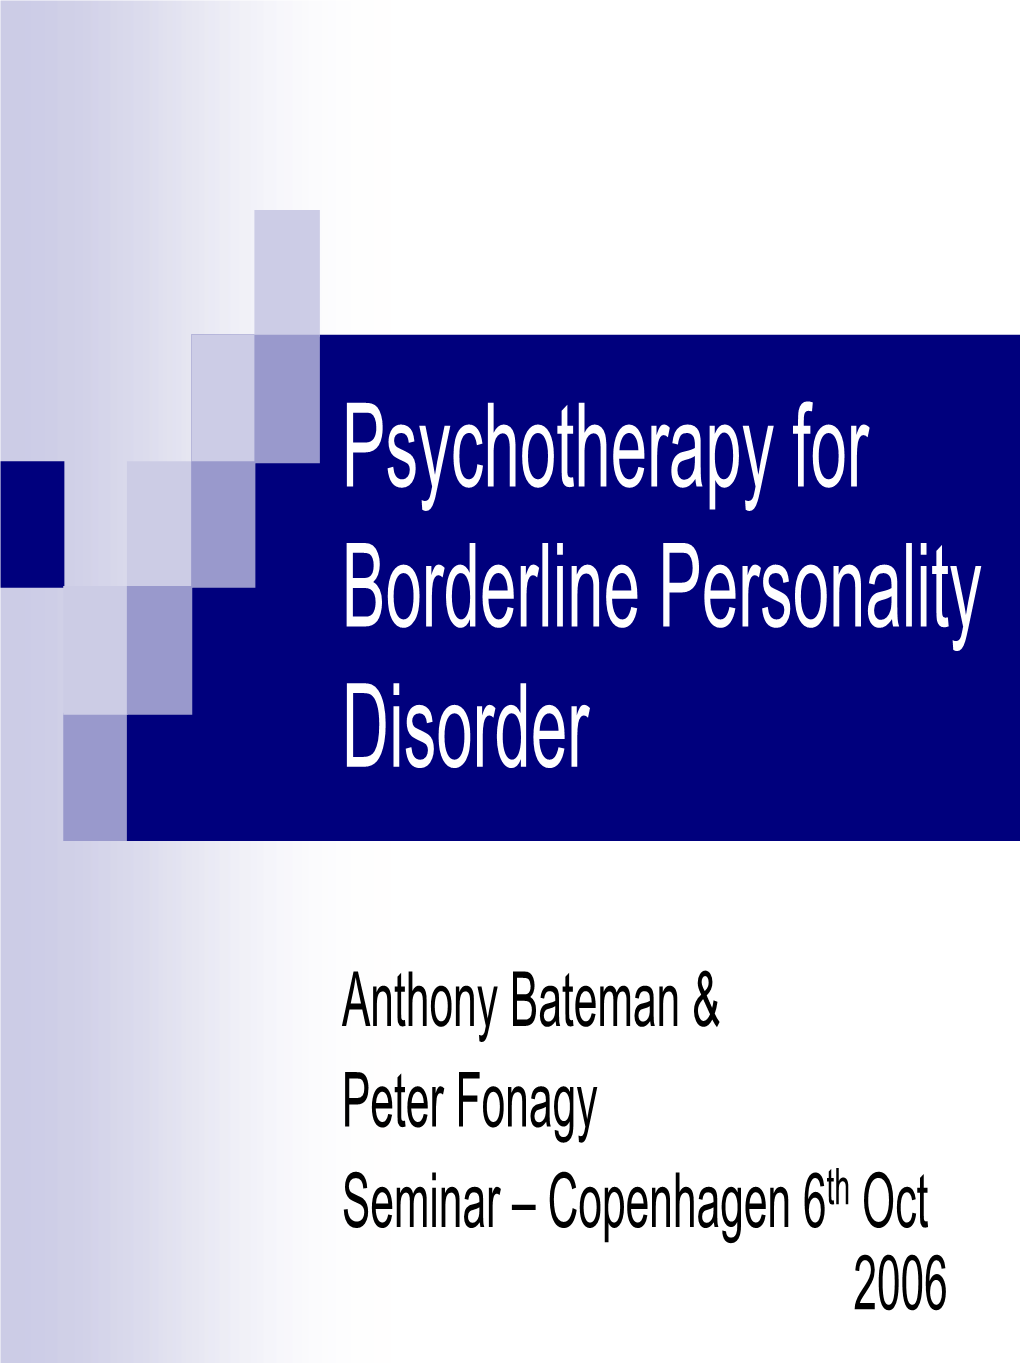 Psychotherapy for Borderline Personality Disorder